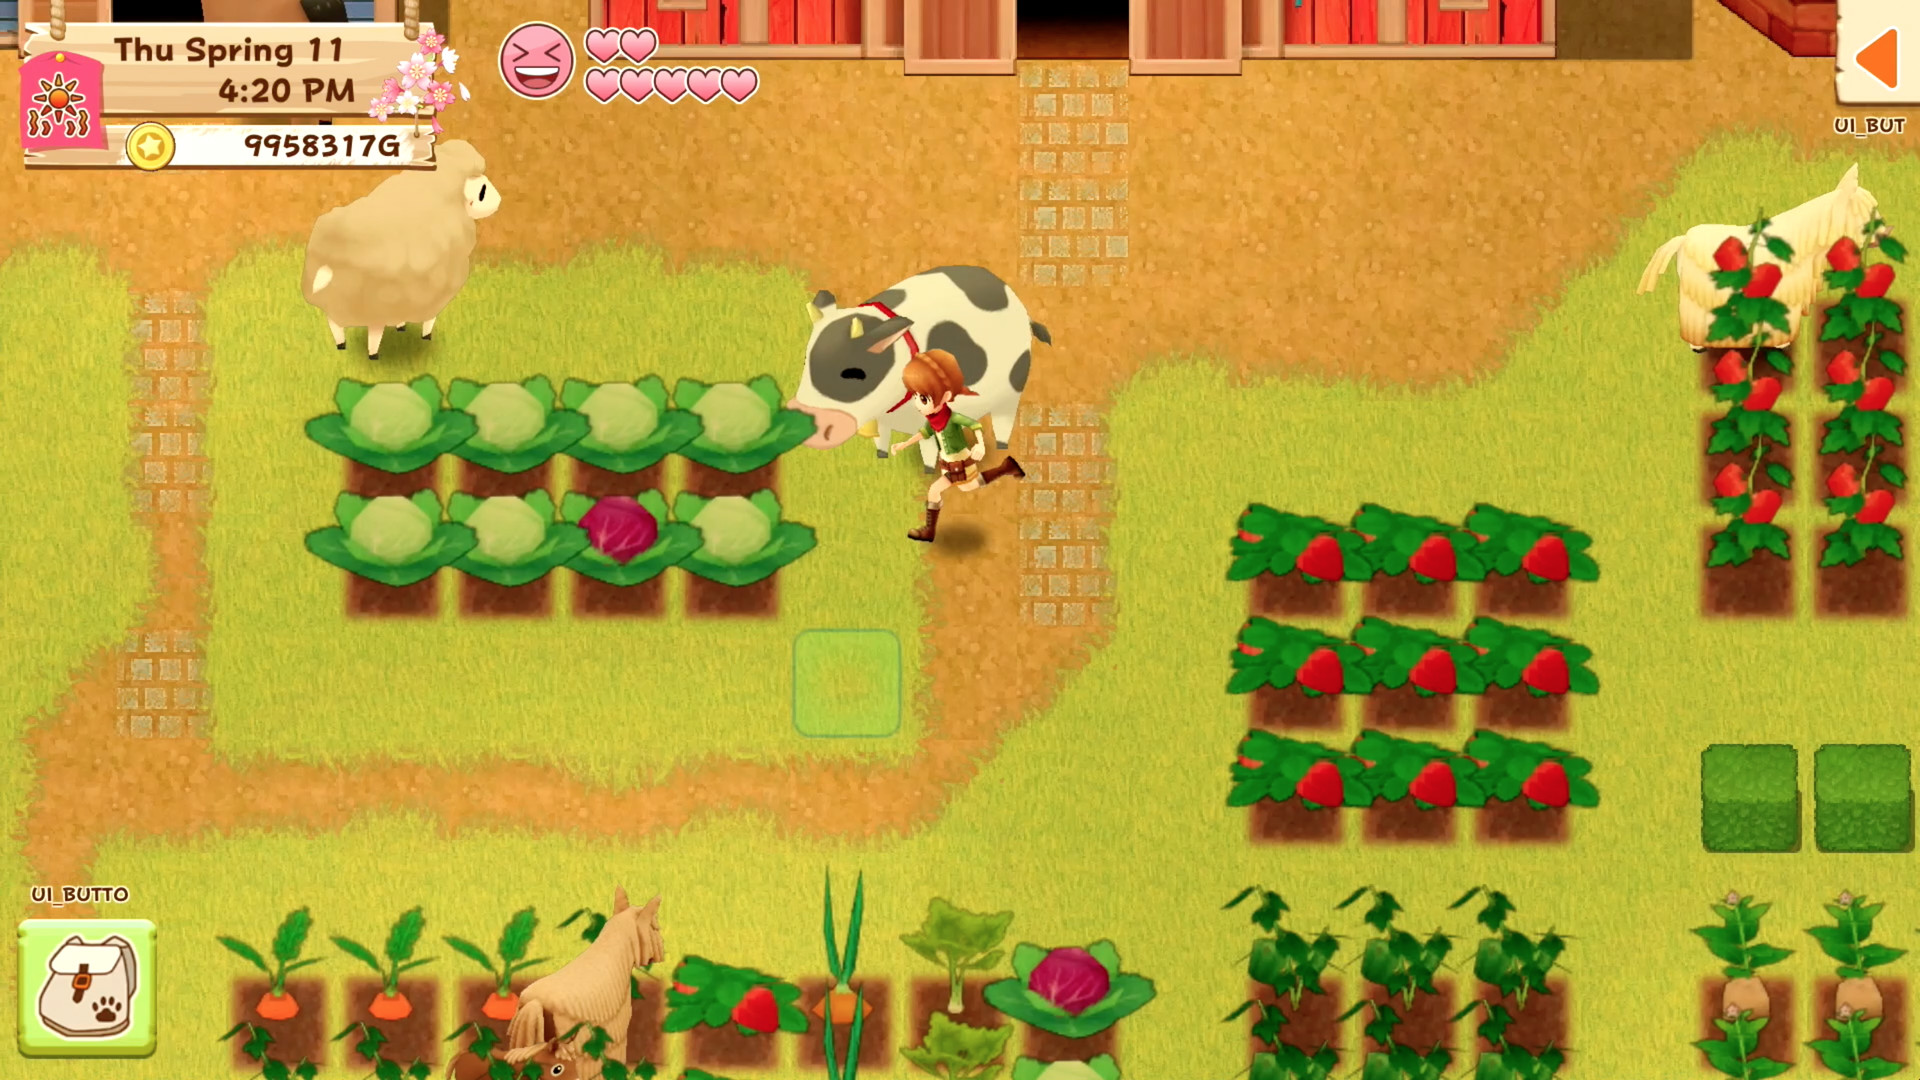 Harvest Moon: Light of Hope Complete Your Set RoW Steam CD Key 15.24 $